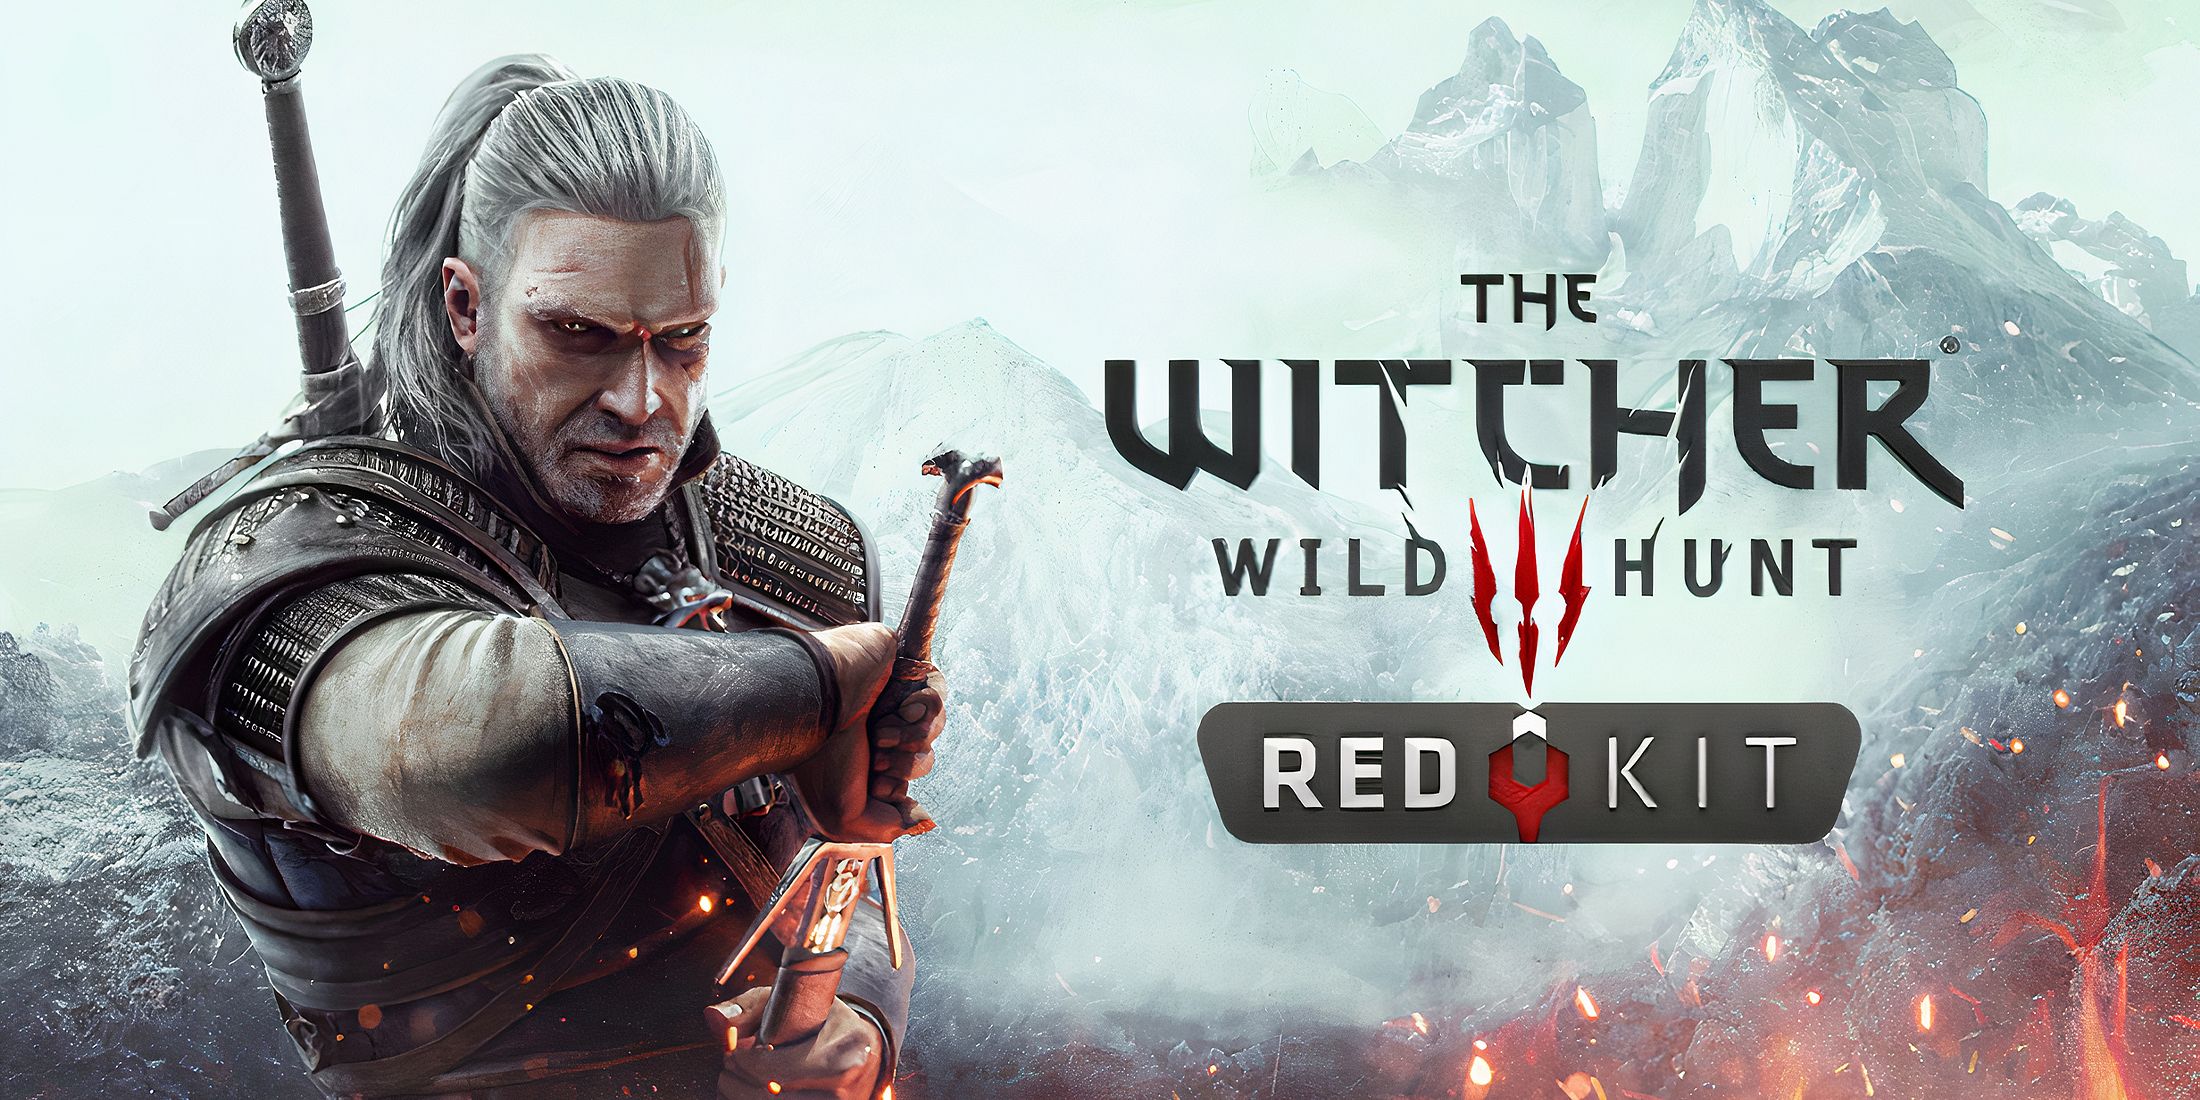 The Witcher 3 Red Kit